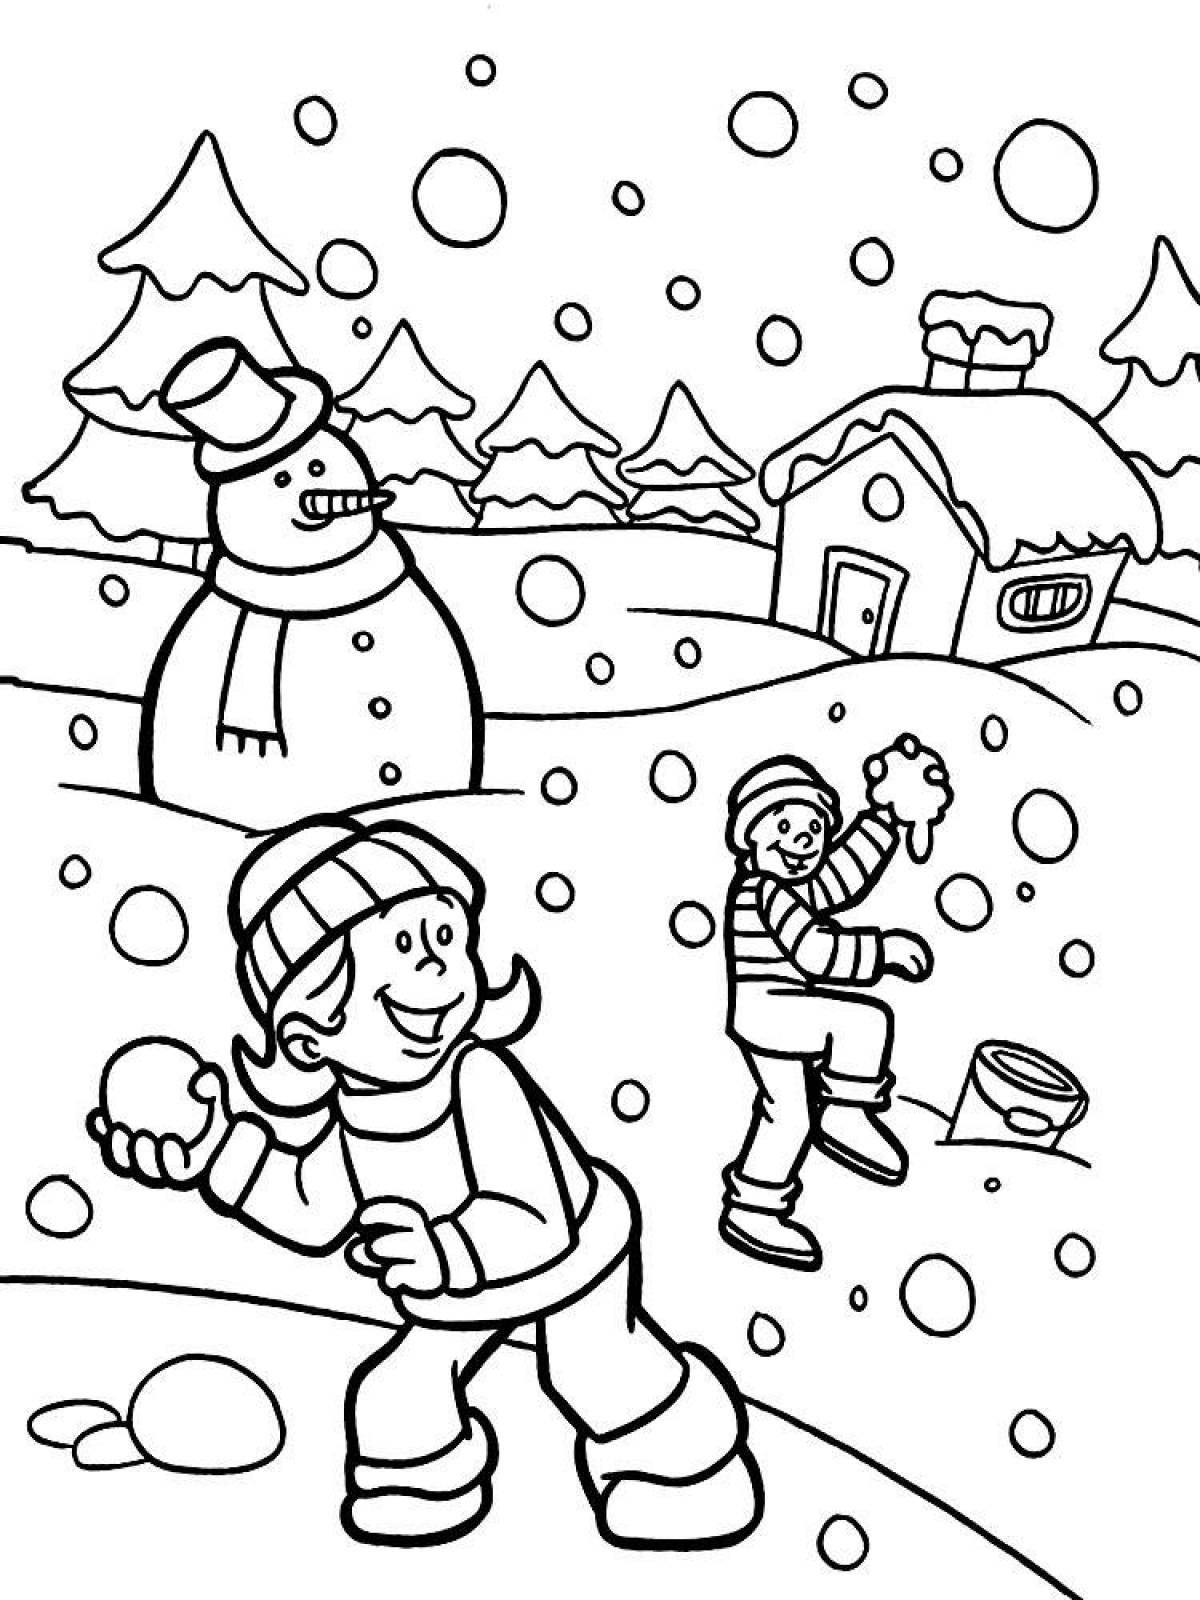 Exotic winter coloring book for 3-4 year olds